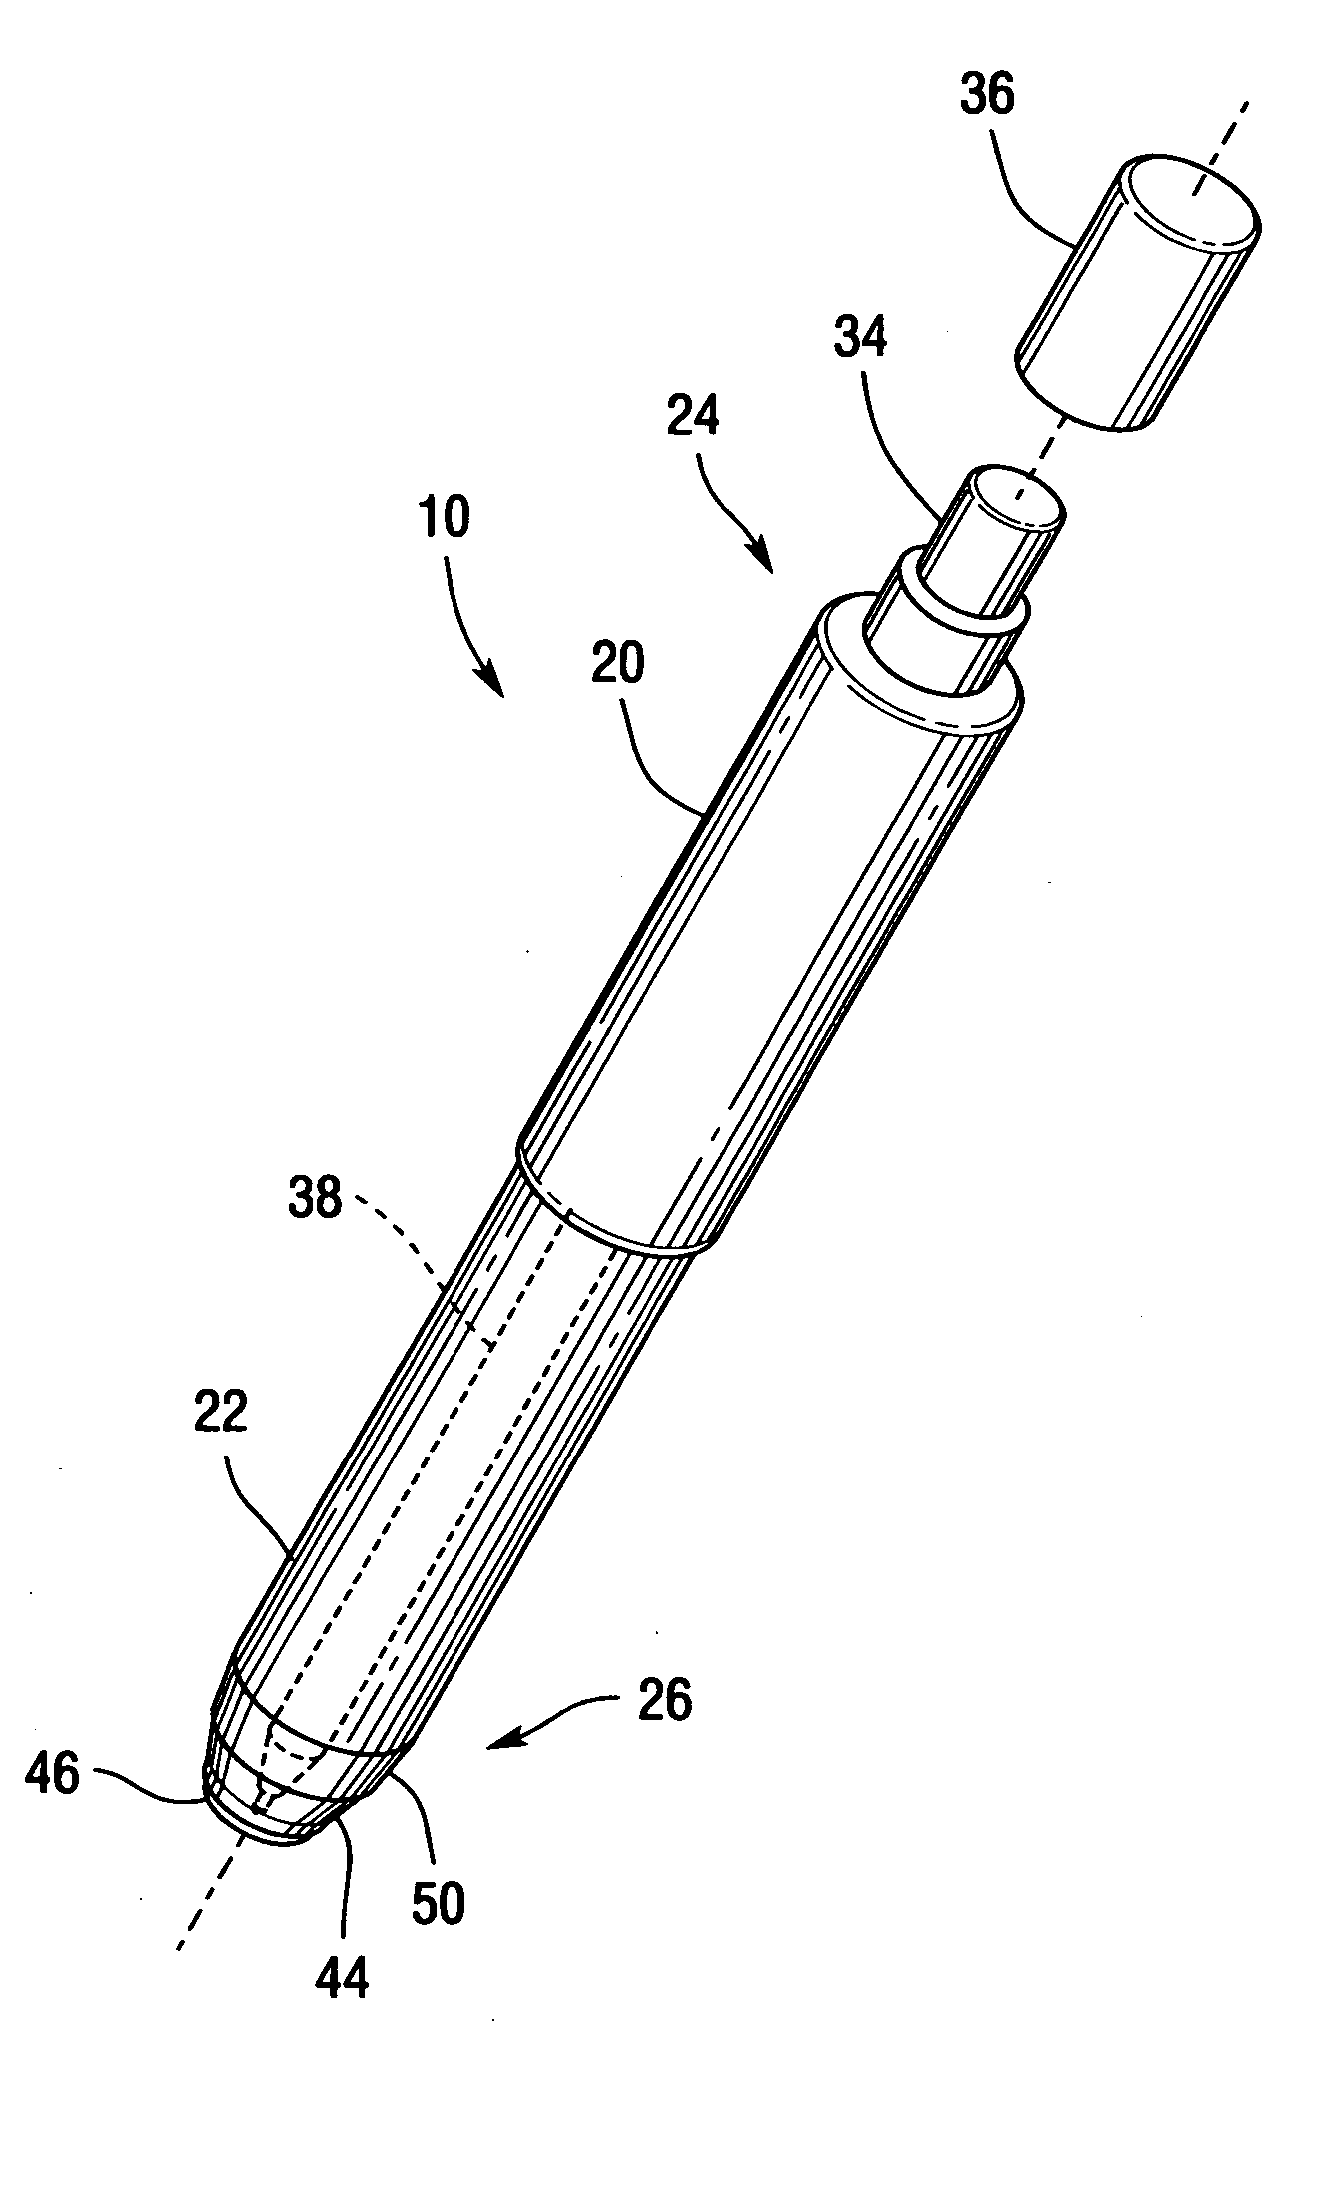 Combination pen or pencil and circular marking implement